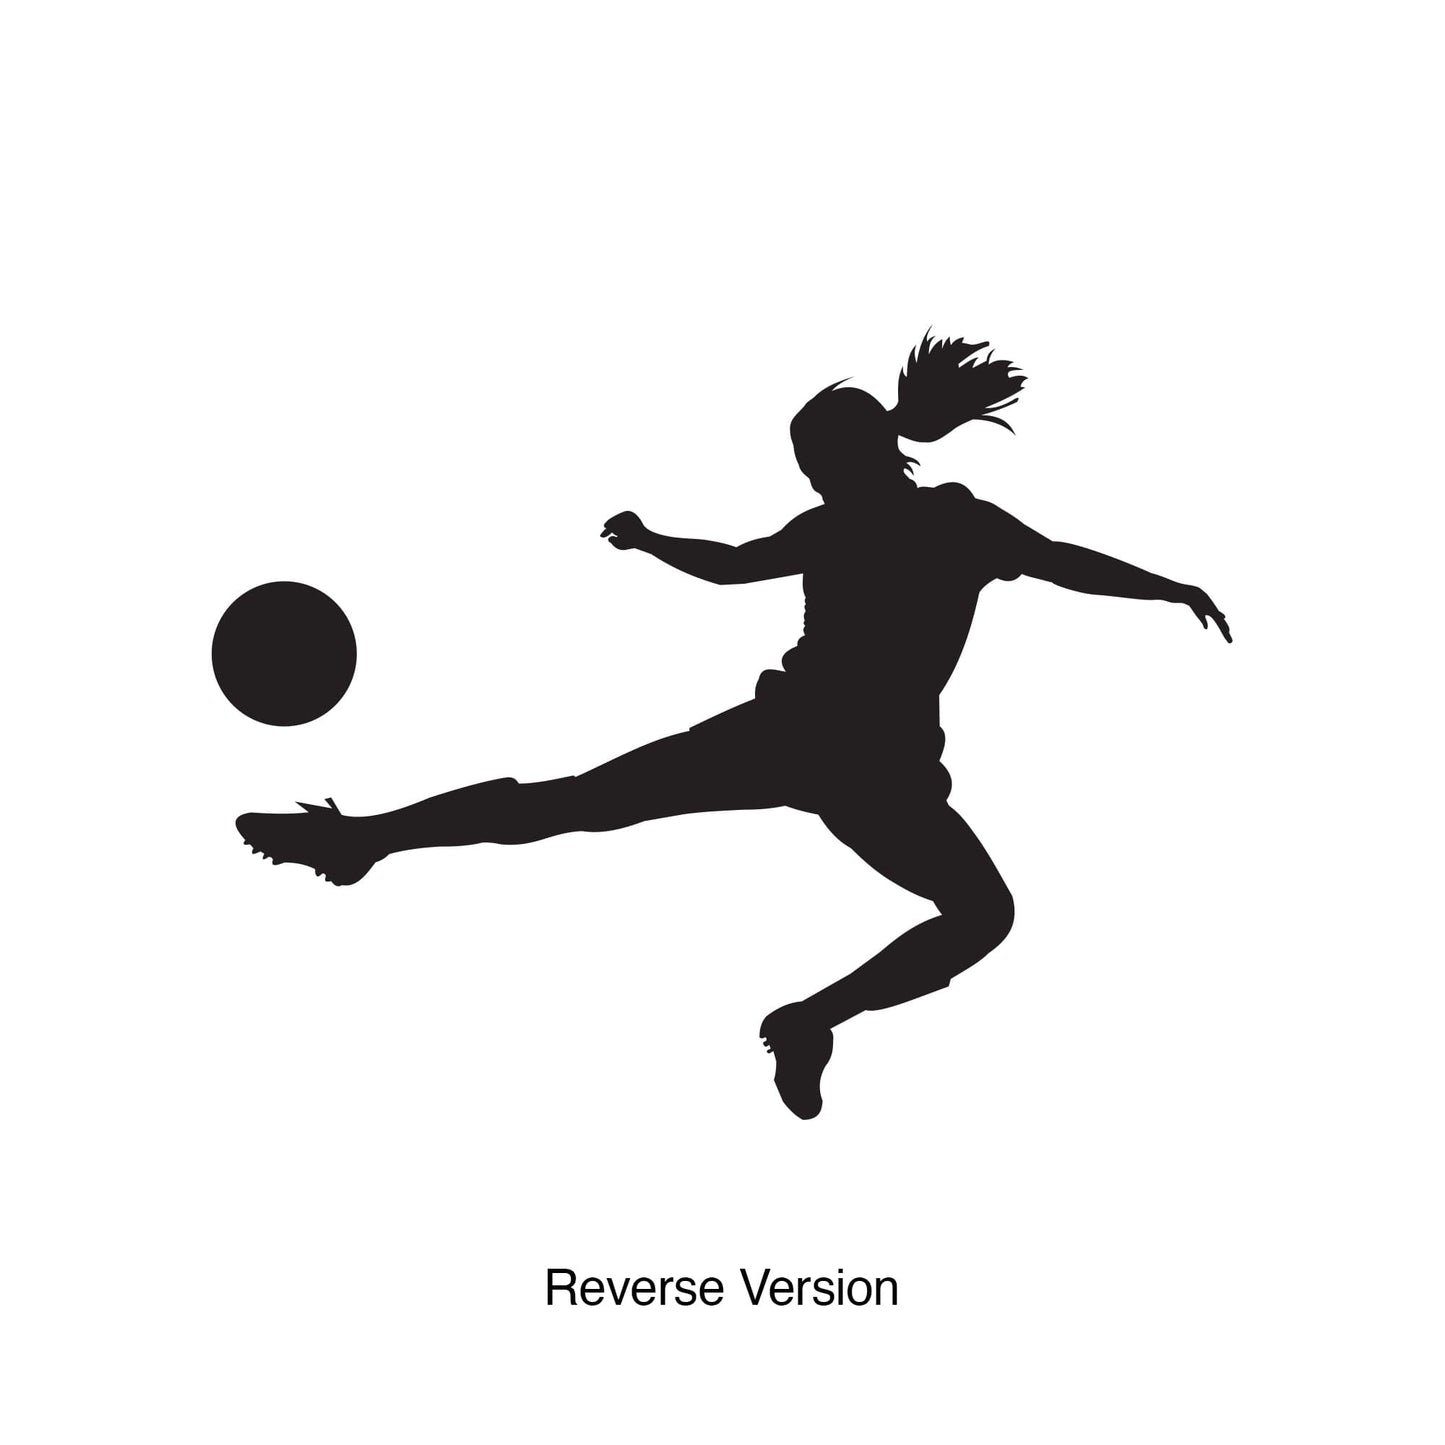 Female Soccer Player Wall Decal Sticker. #1533